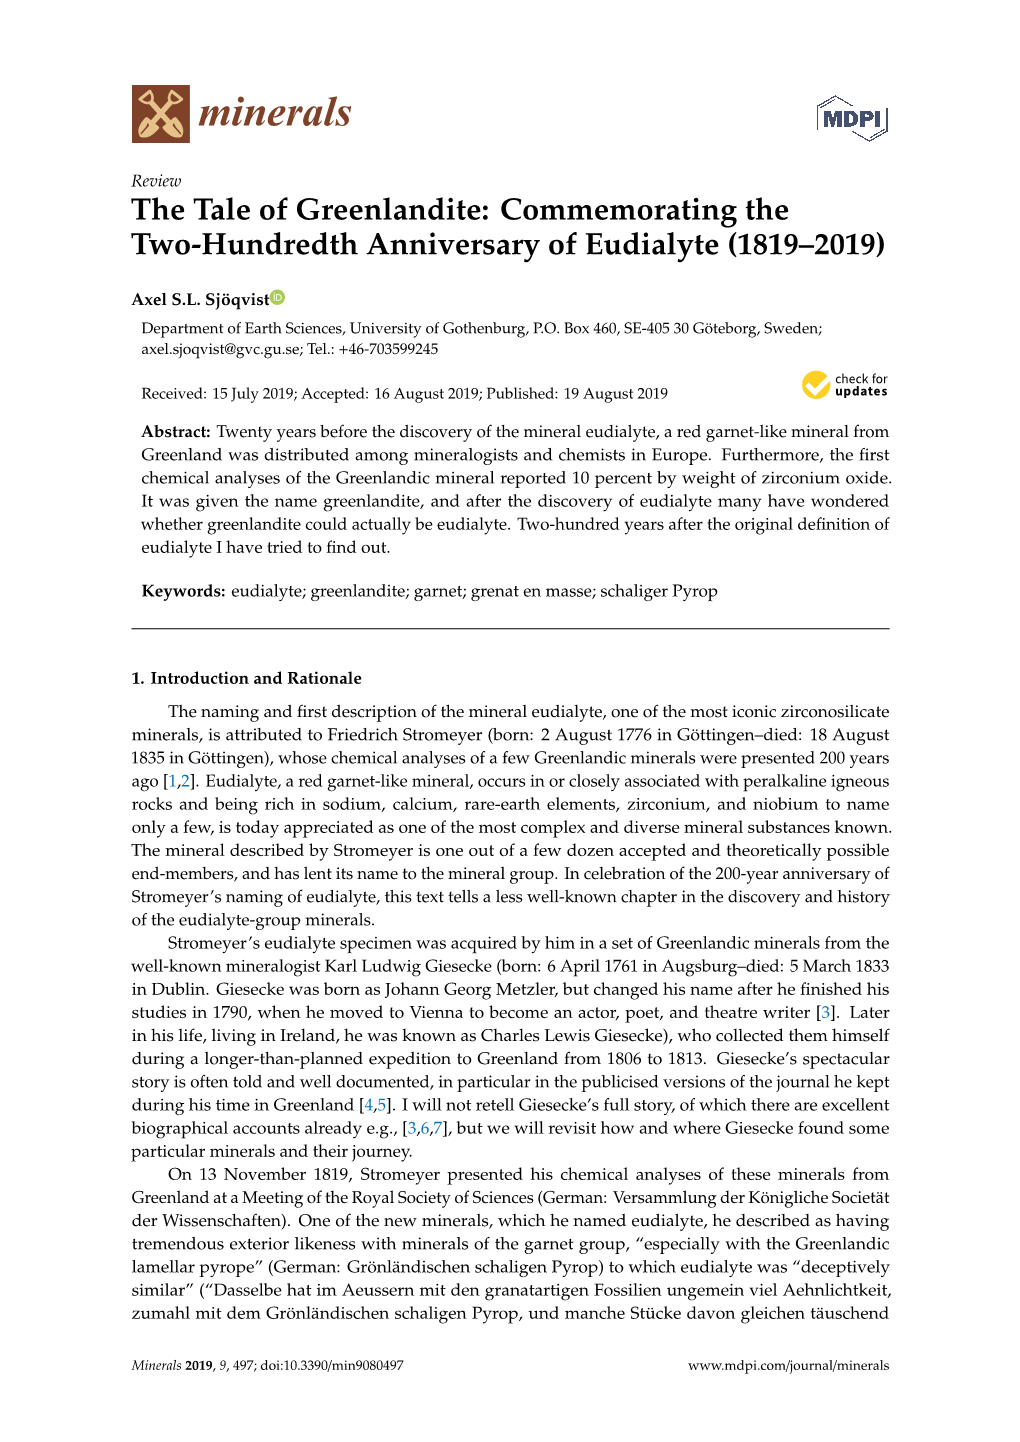 The Tale of Greenlandite: Commemorating the Two-Hundredth Anniversary of Eudialyte (1819–2019)